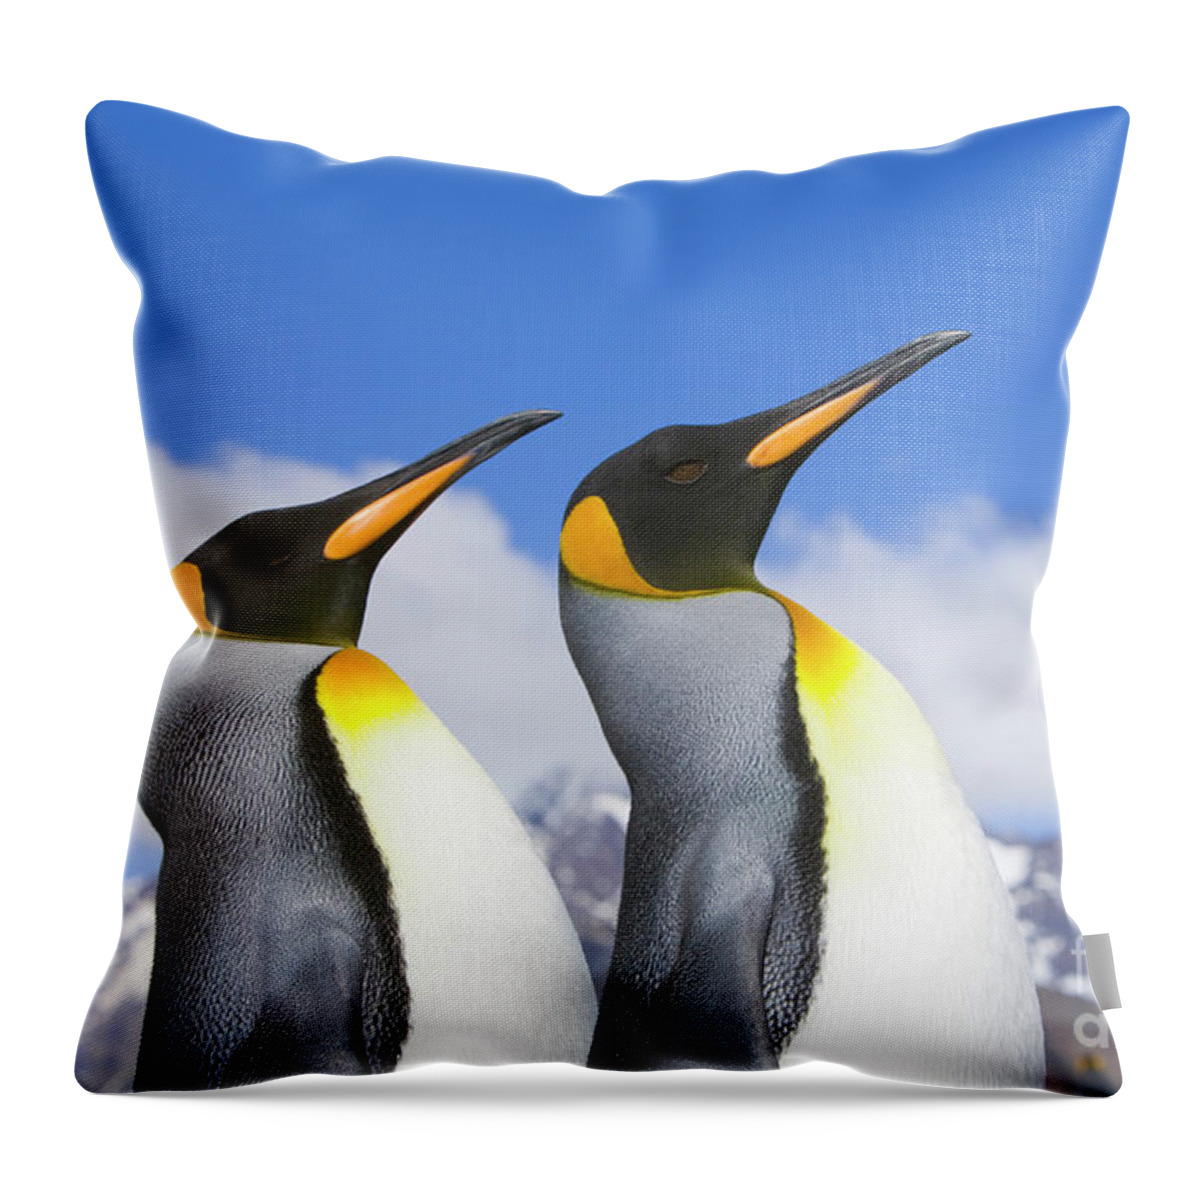 00345339 Throw Pillow featuring the photograph King Penguin Duo by Yva Momatiuk John Eastcott